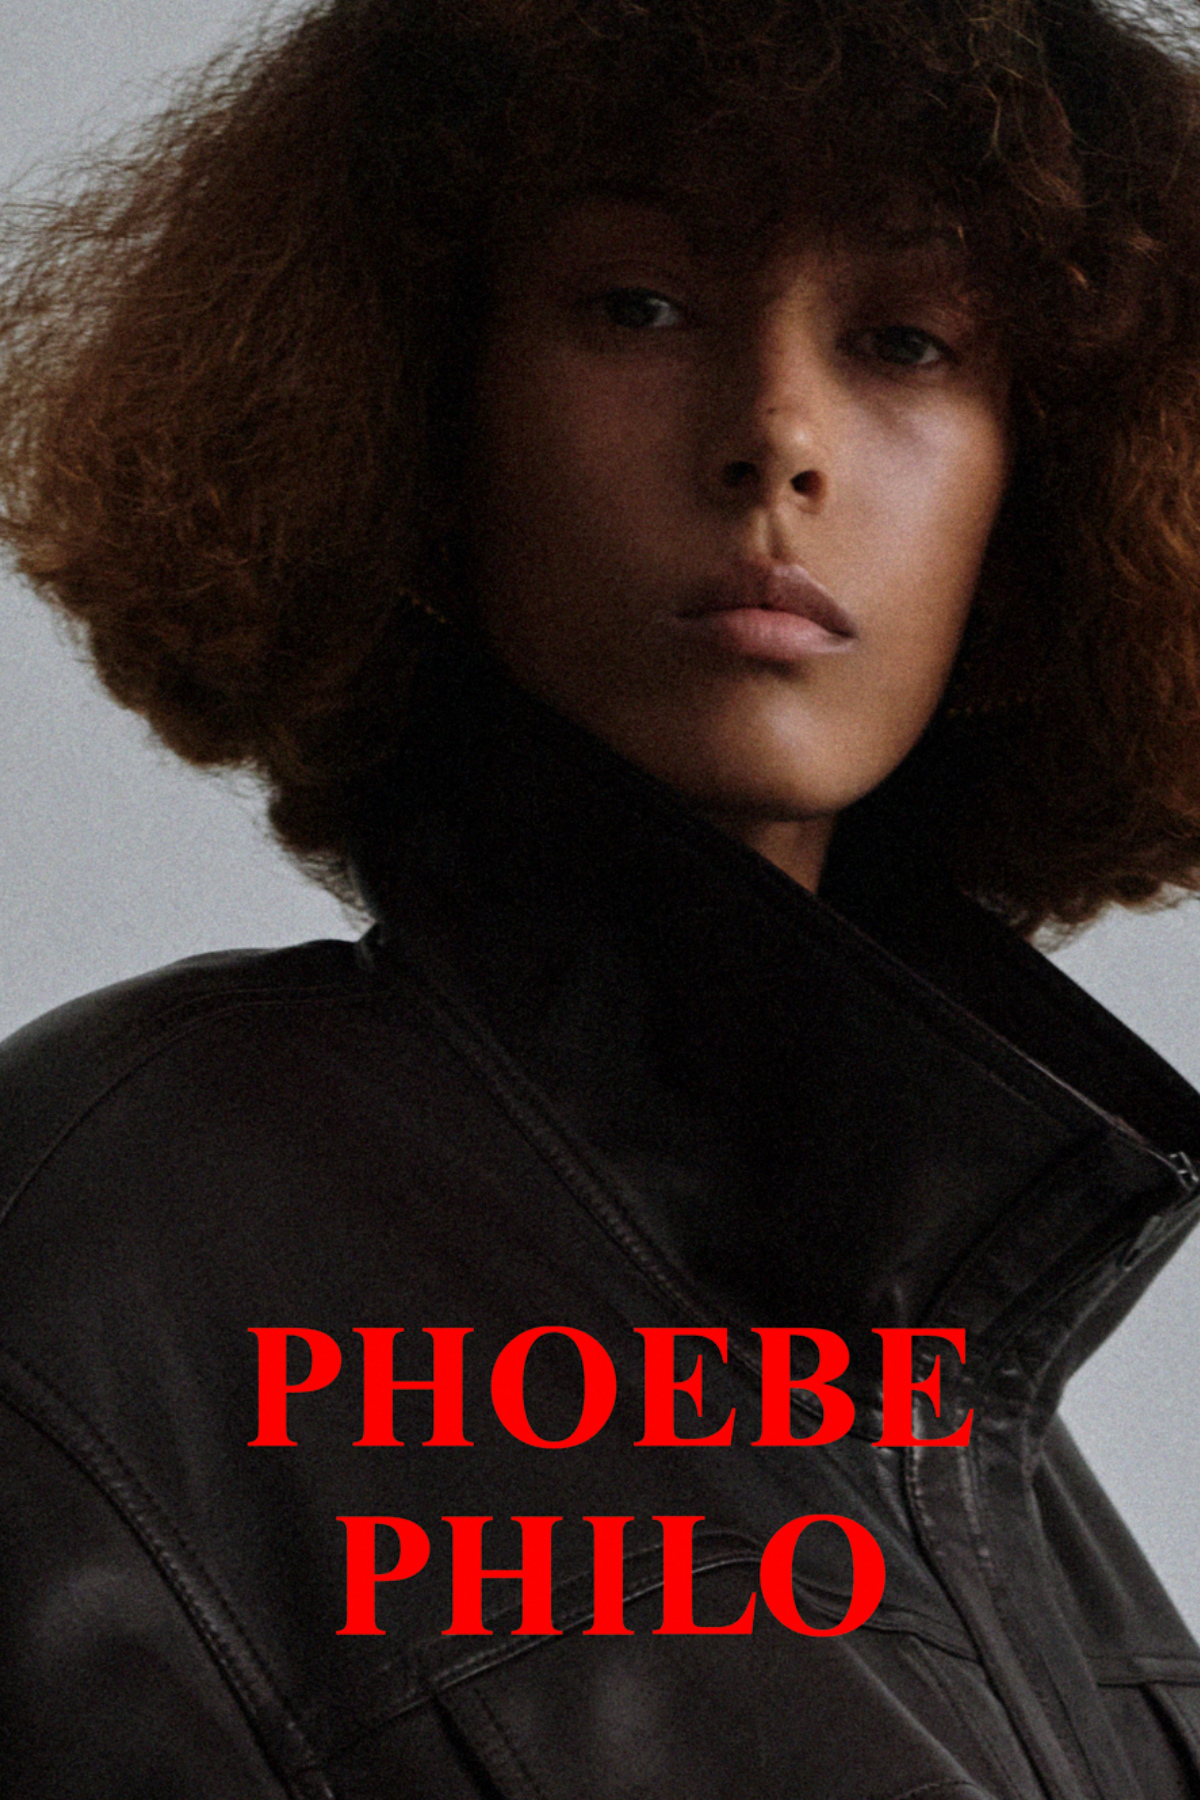 Phoebe Philo has launched her first collection under her eponymous label.